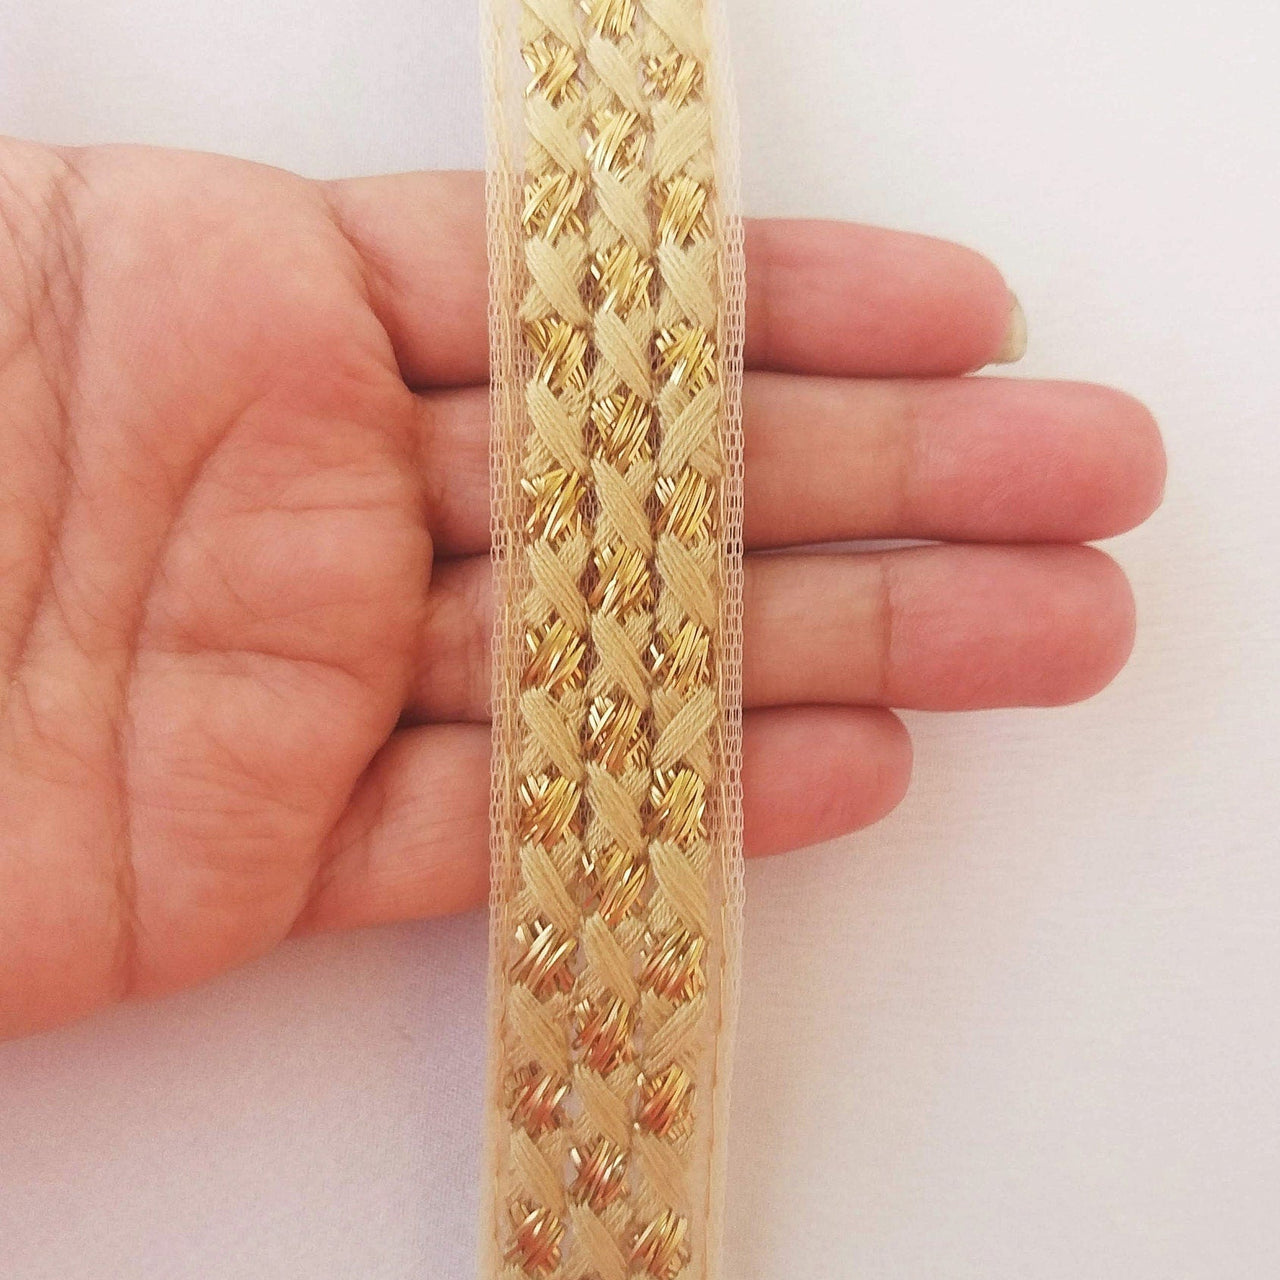 Beige Net Lace Trim With Beautiful  Brown / Red And Gold Embroidery, Approx. 20mm wide